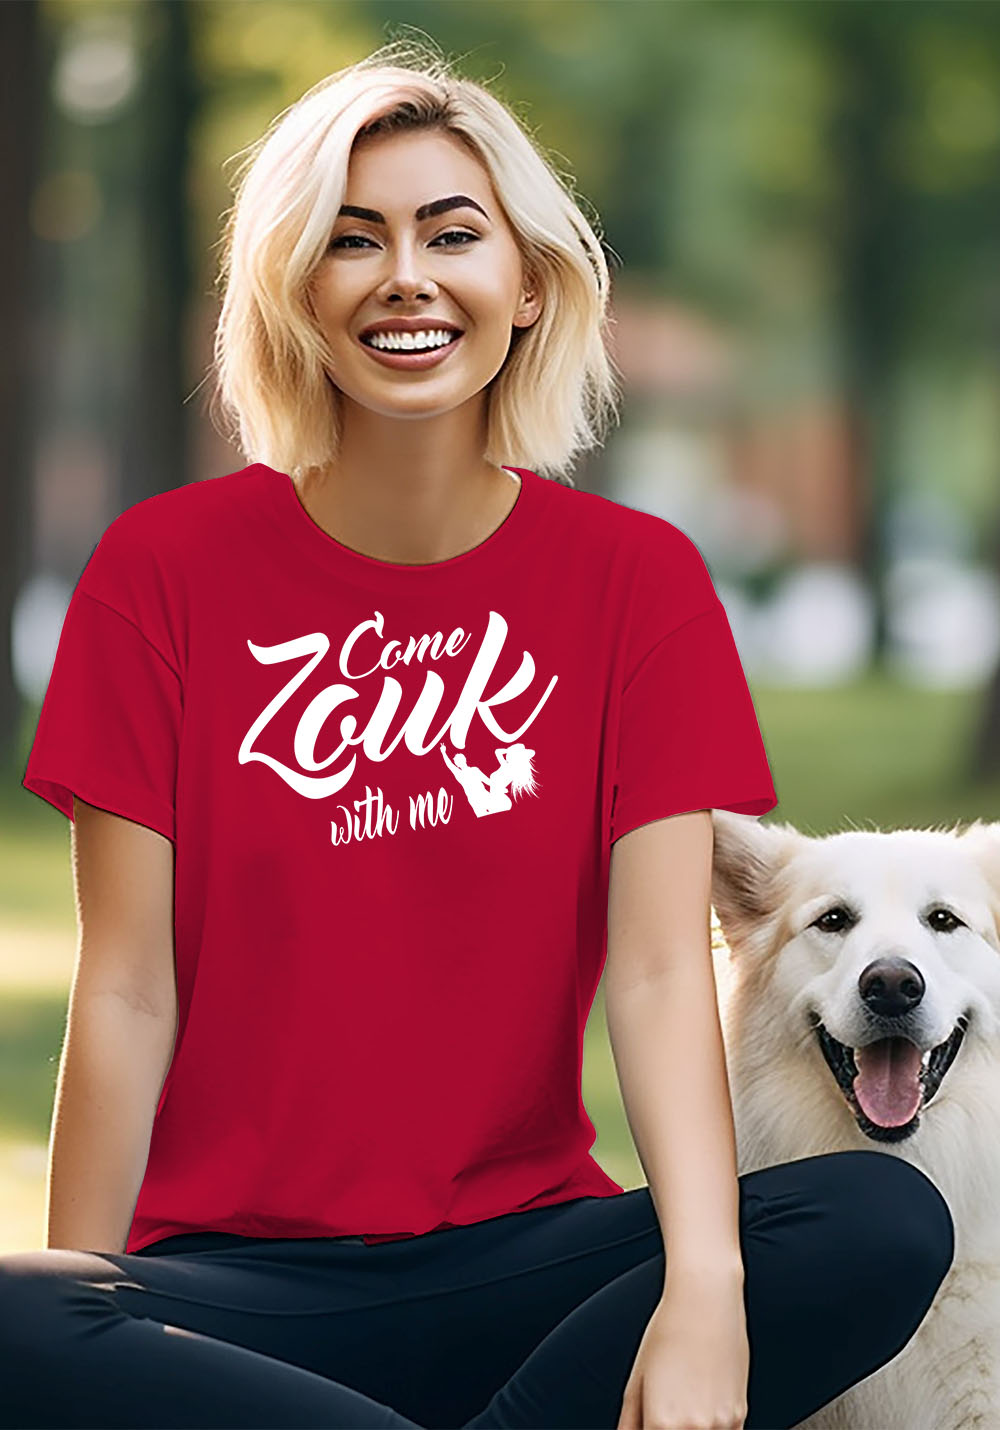 Woman wearing Zouk T-shirt decorated with unique “Come Zouk with me” design in red crew neck style